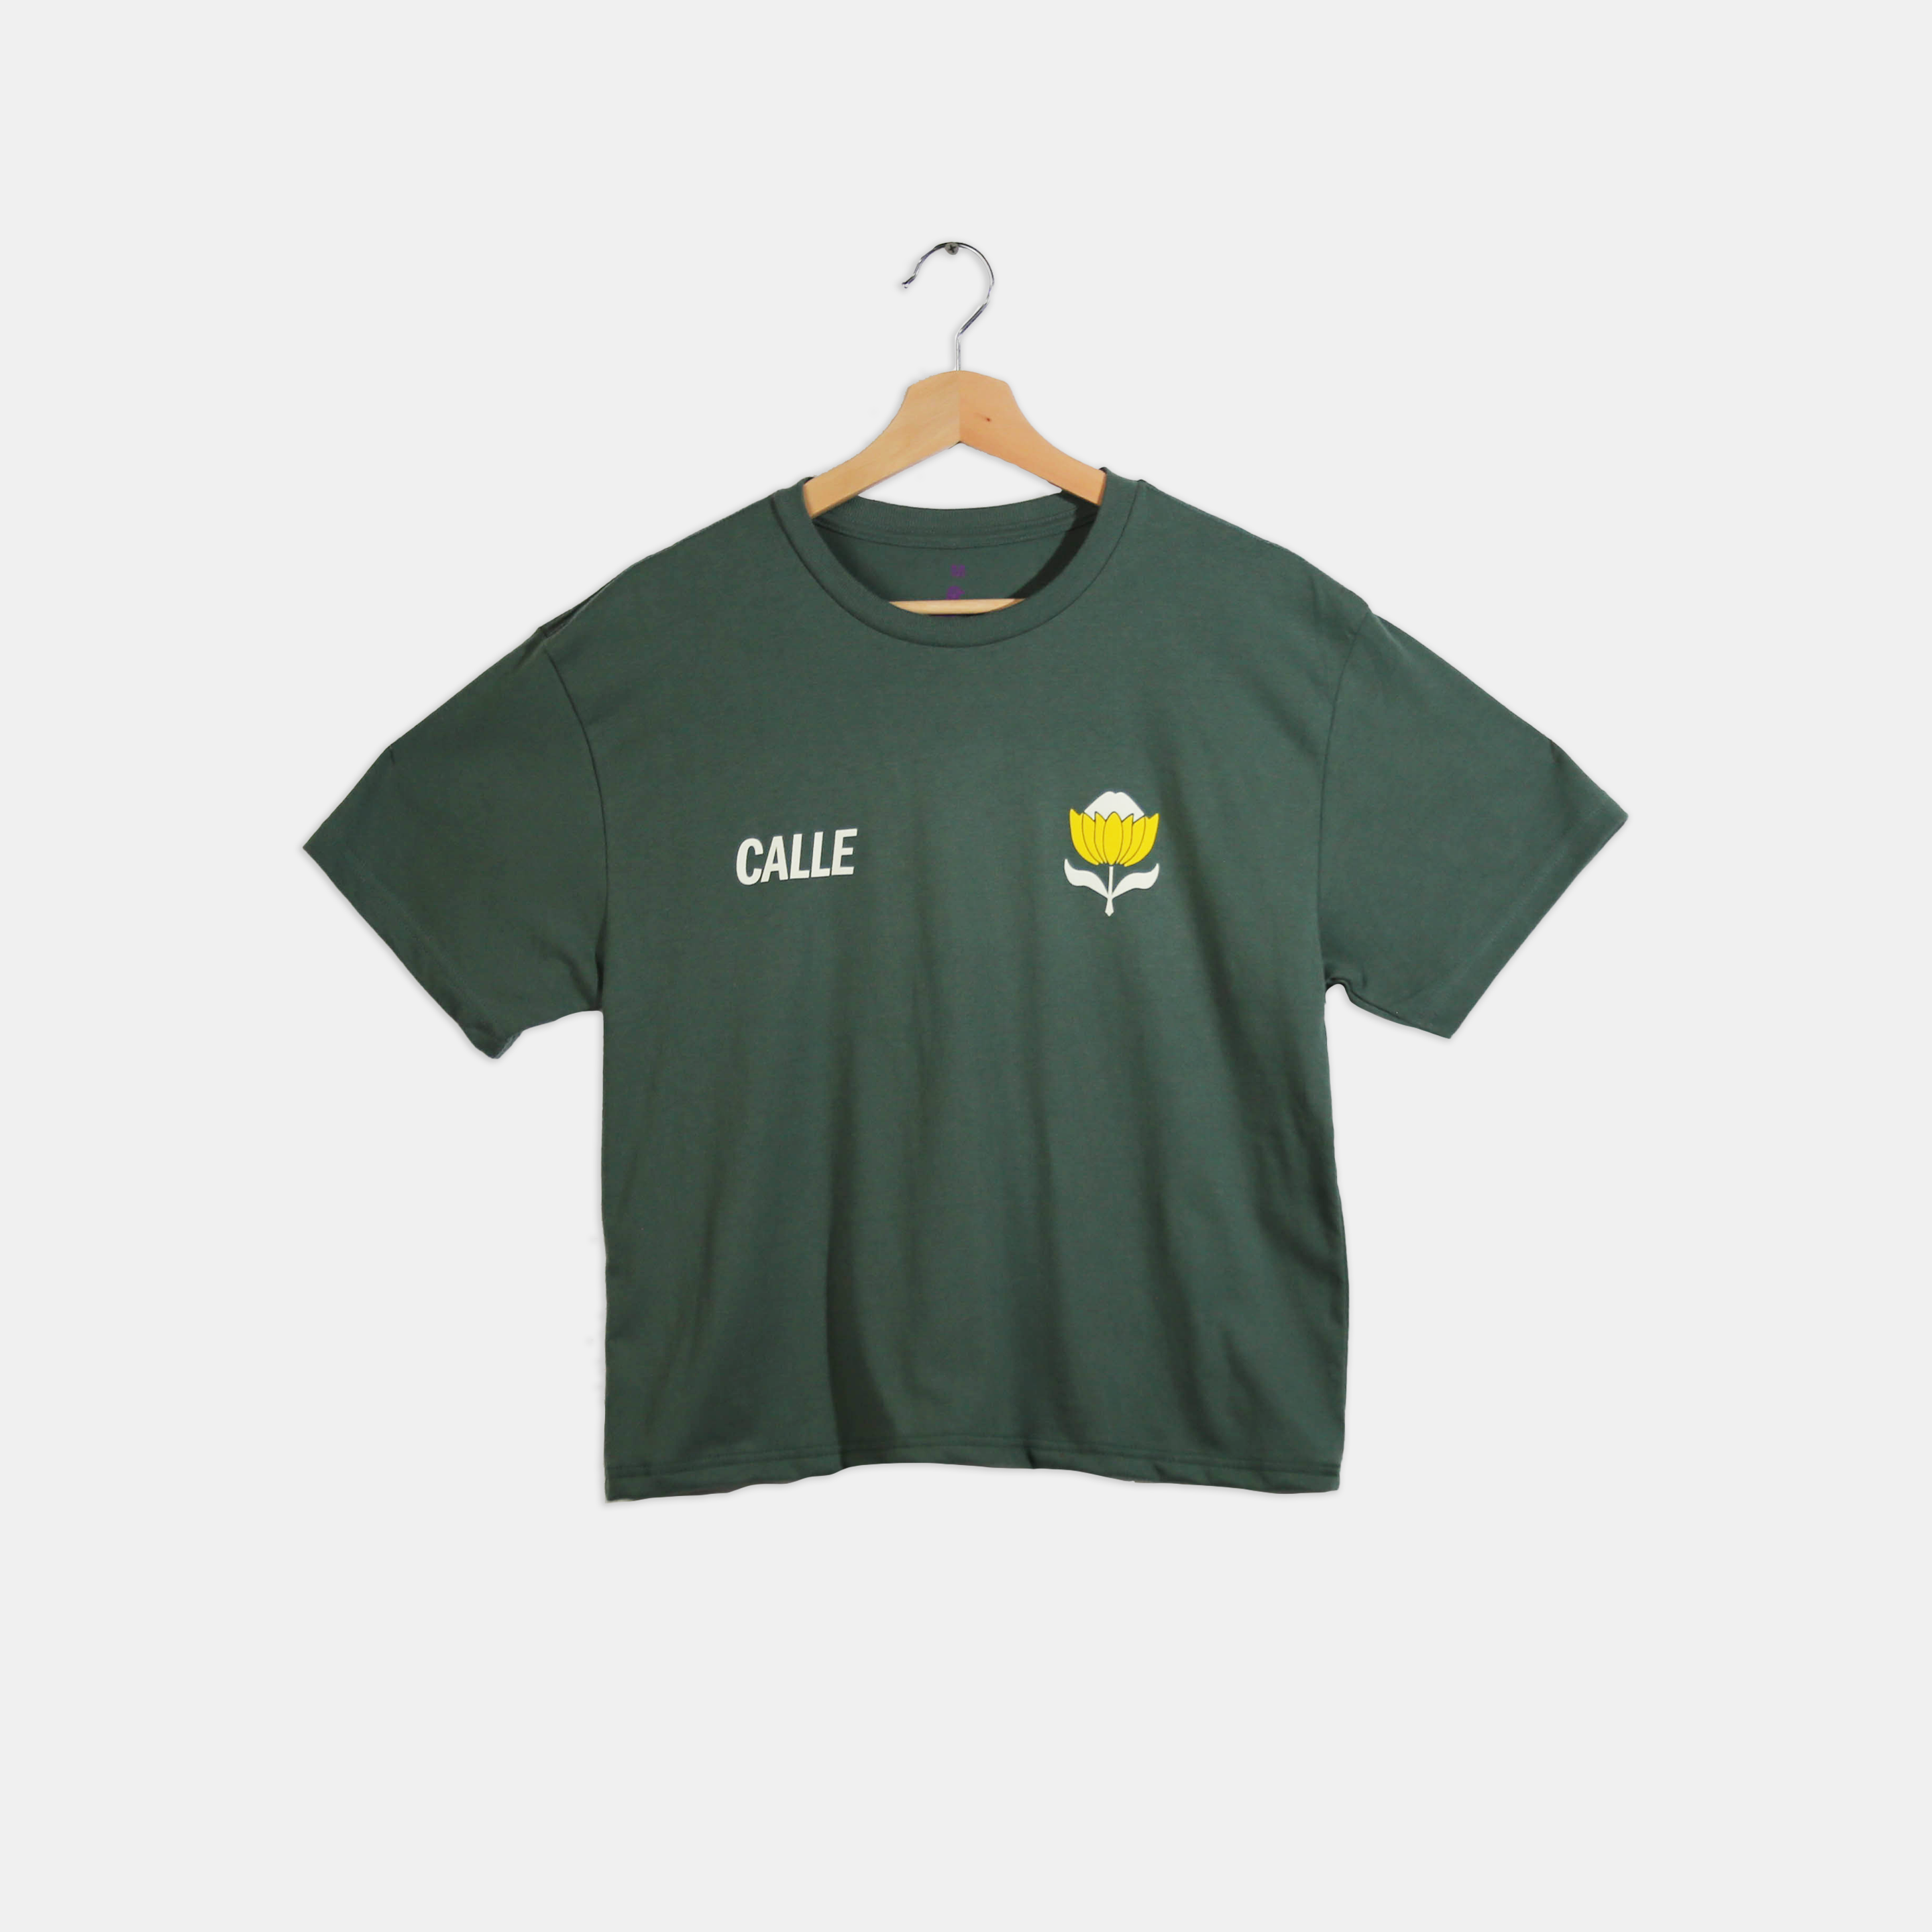 "Unofficial" South Africa Cropped Tee